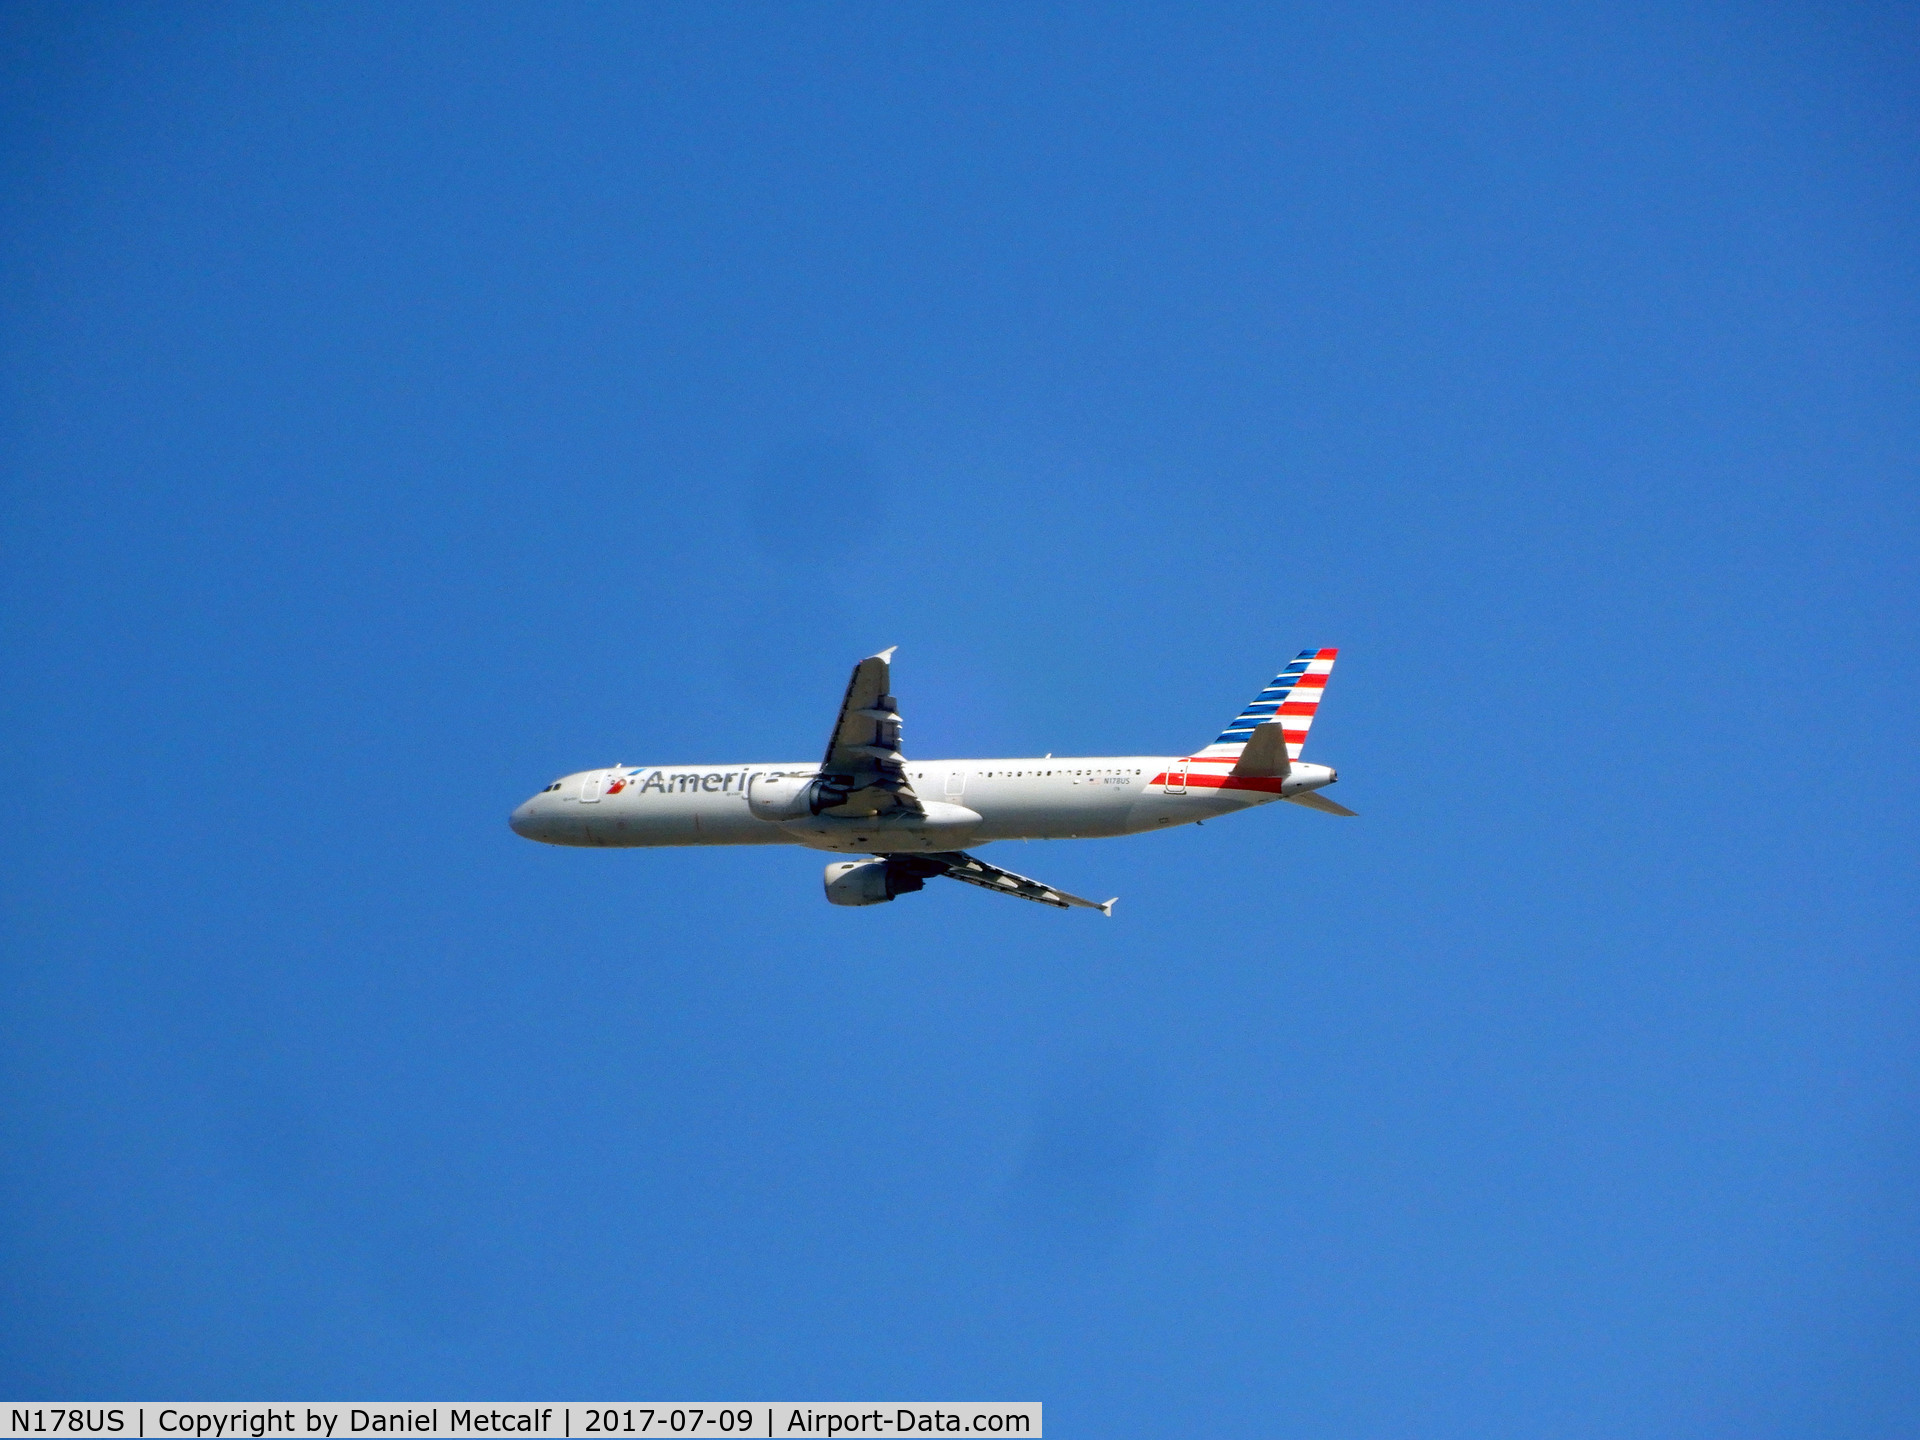 N178US, 2001 Airbus A321-211 C/N 1519, On its way to PHX